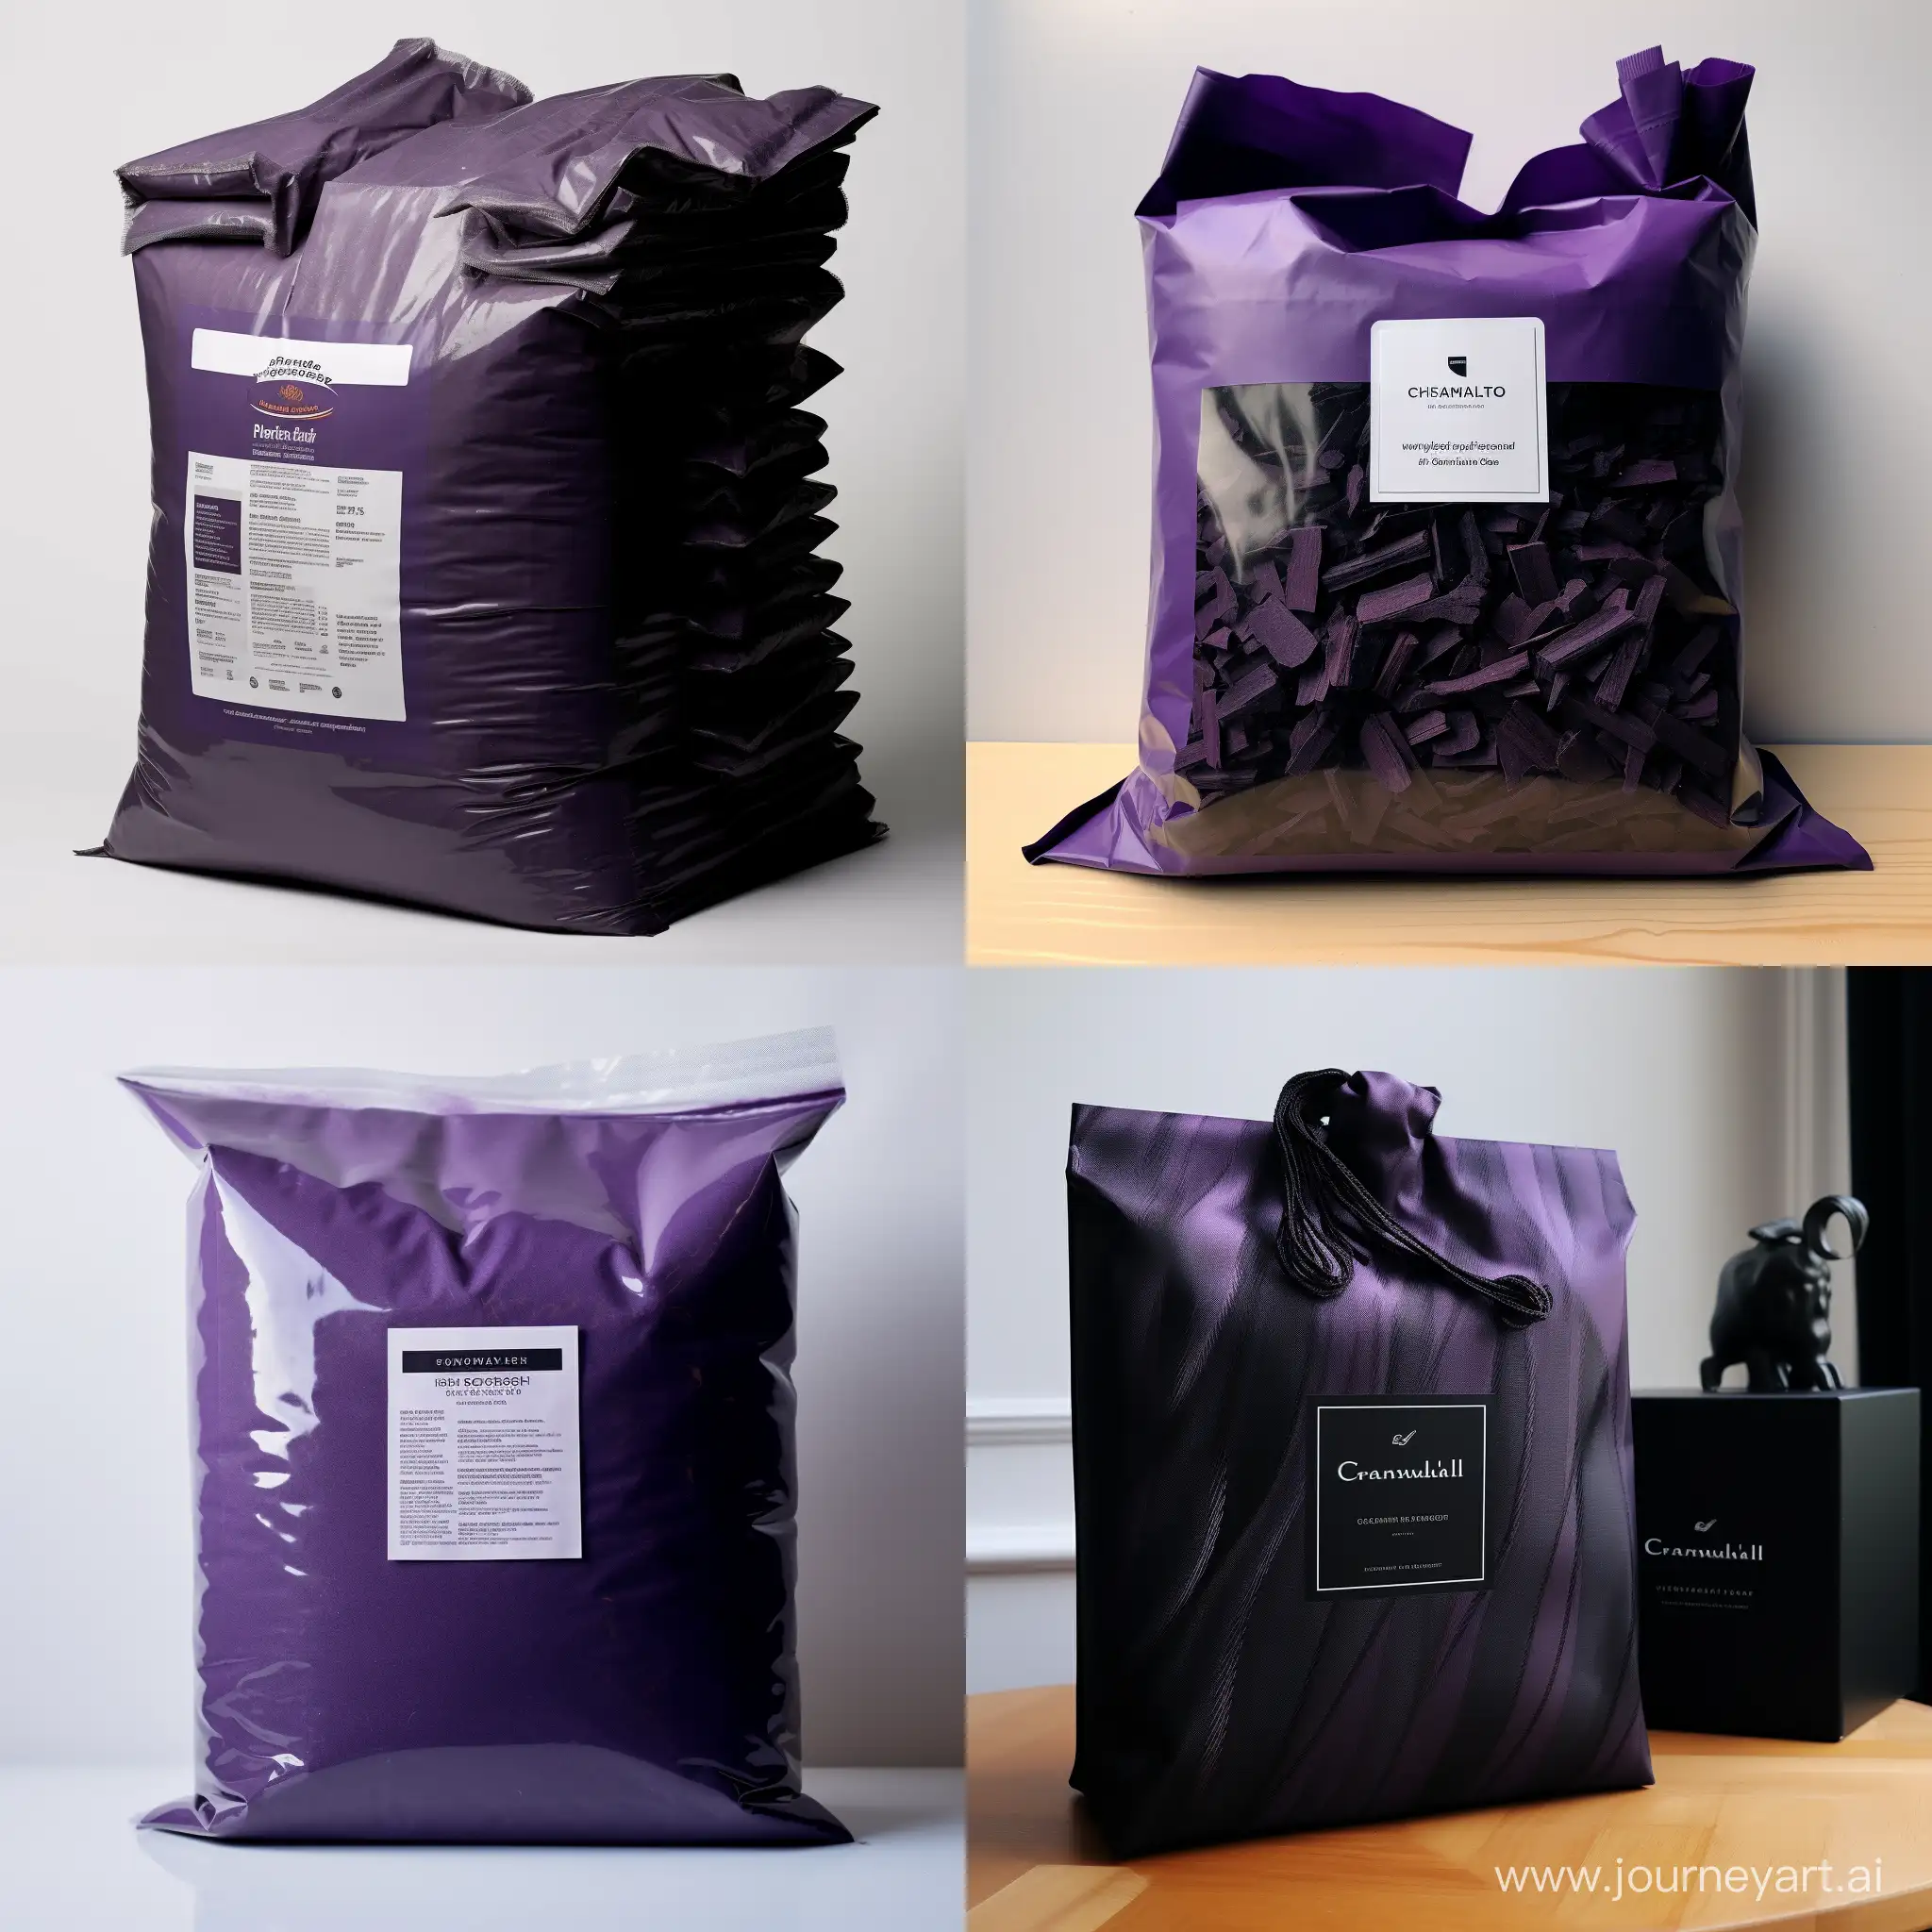 Charcoal-Purple-Bag-5kg-Aesthetic-Dark-Art-Supply-for-Creative-Projects